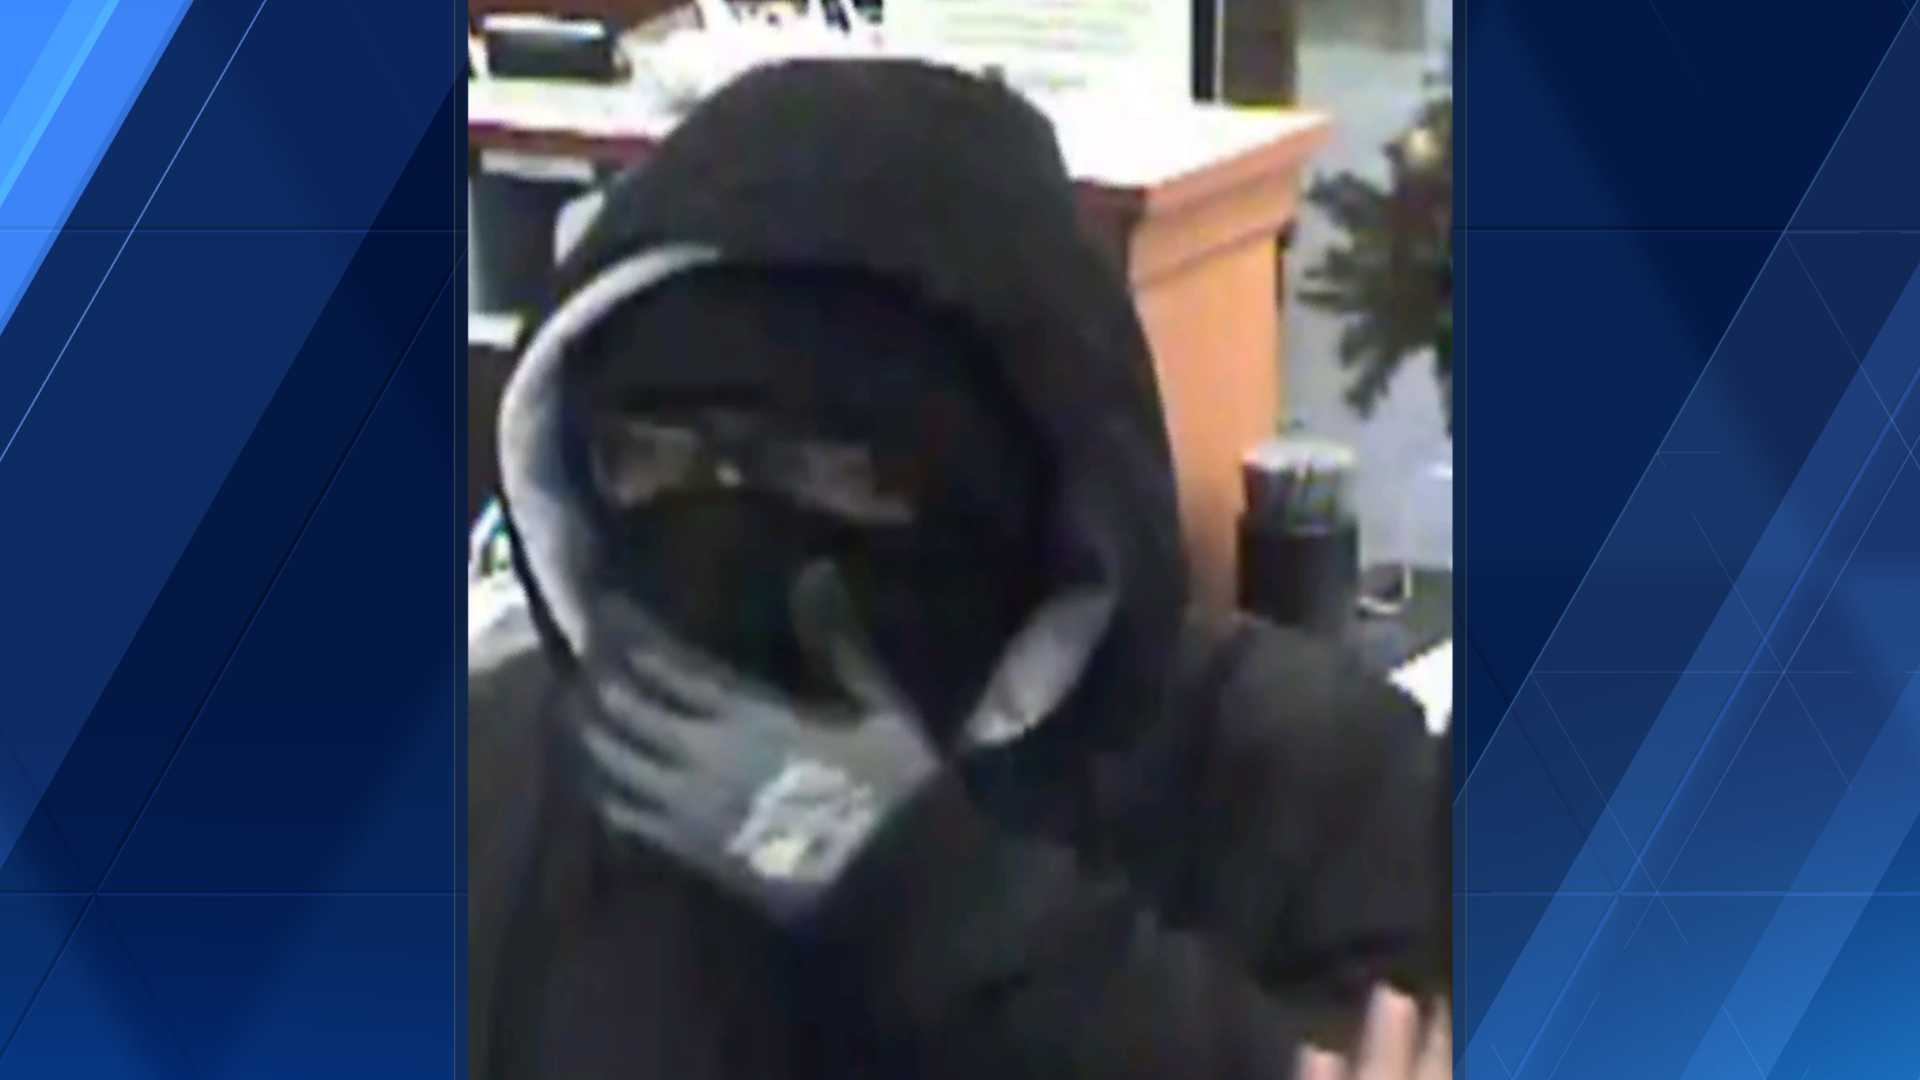 UPDATE: Omaha Police release photos from bank robbery at Bank of the West